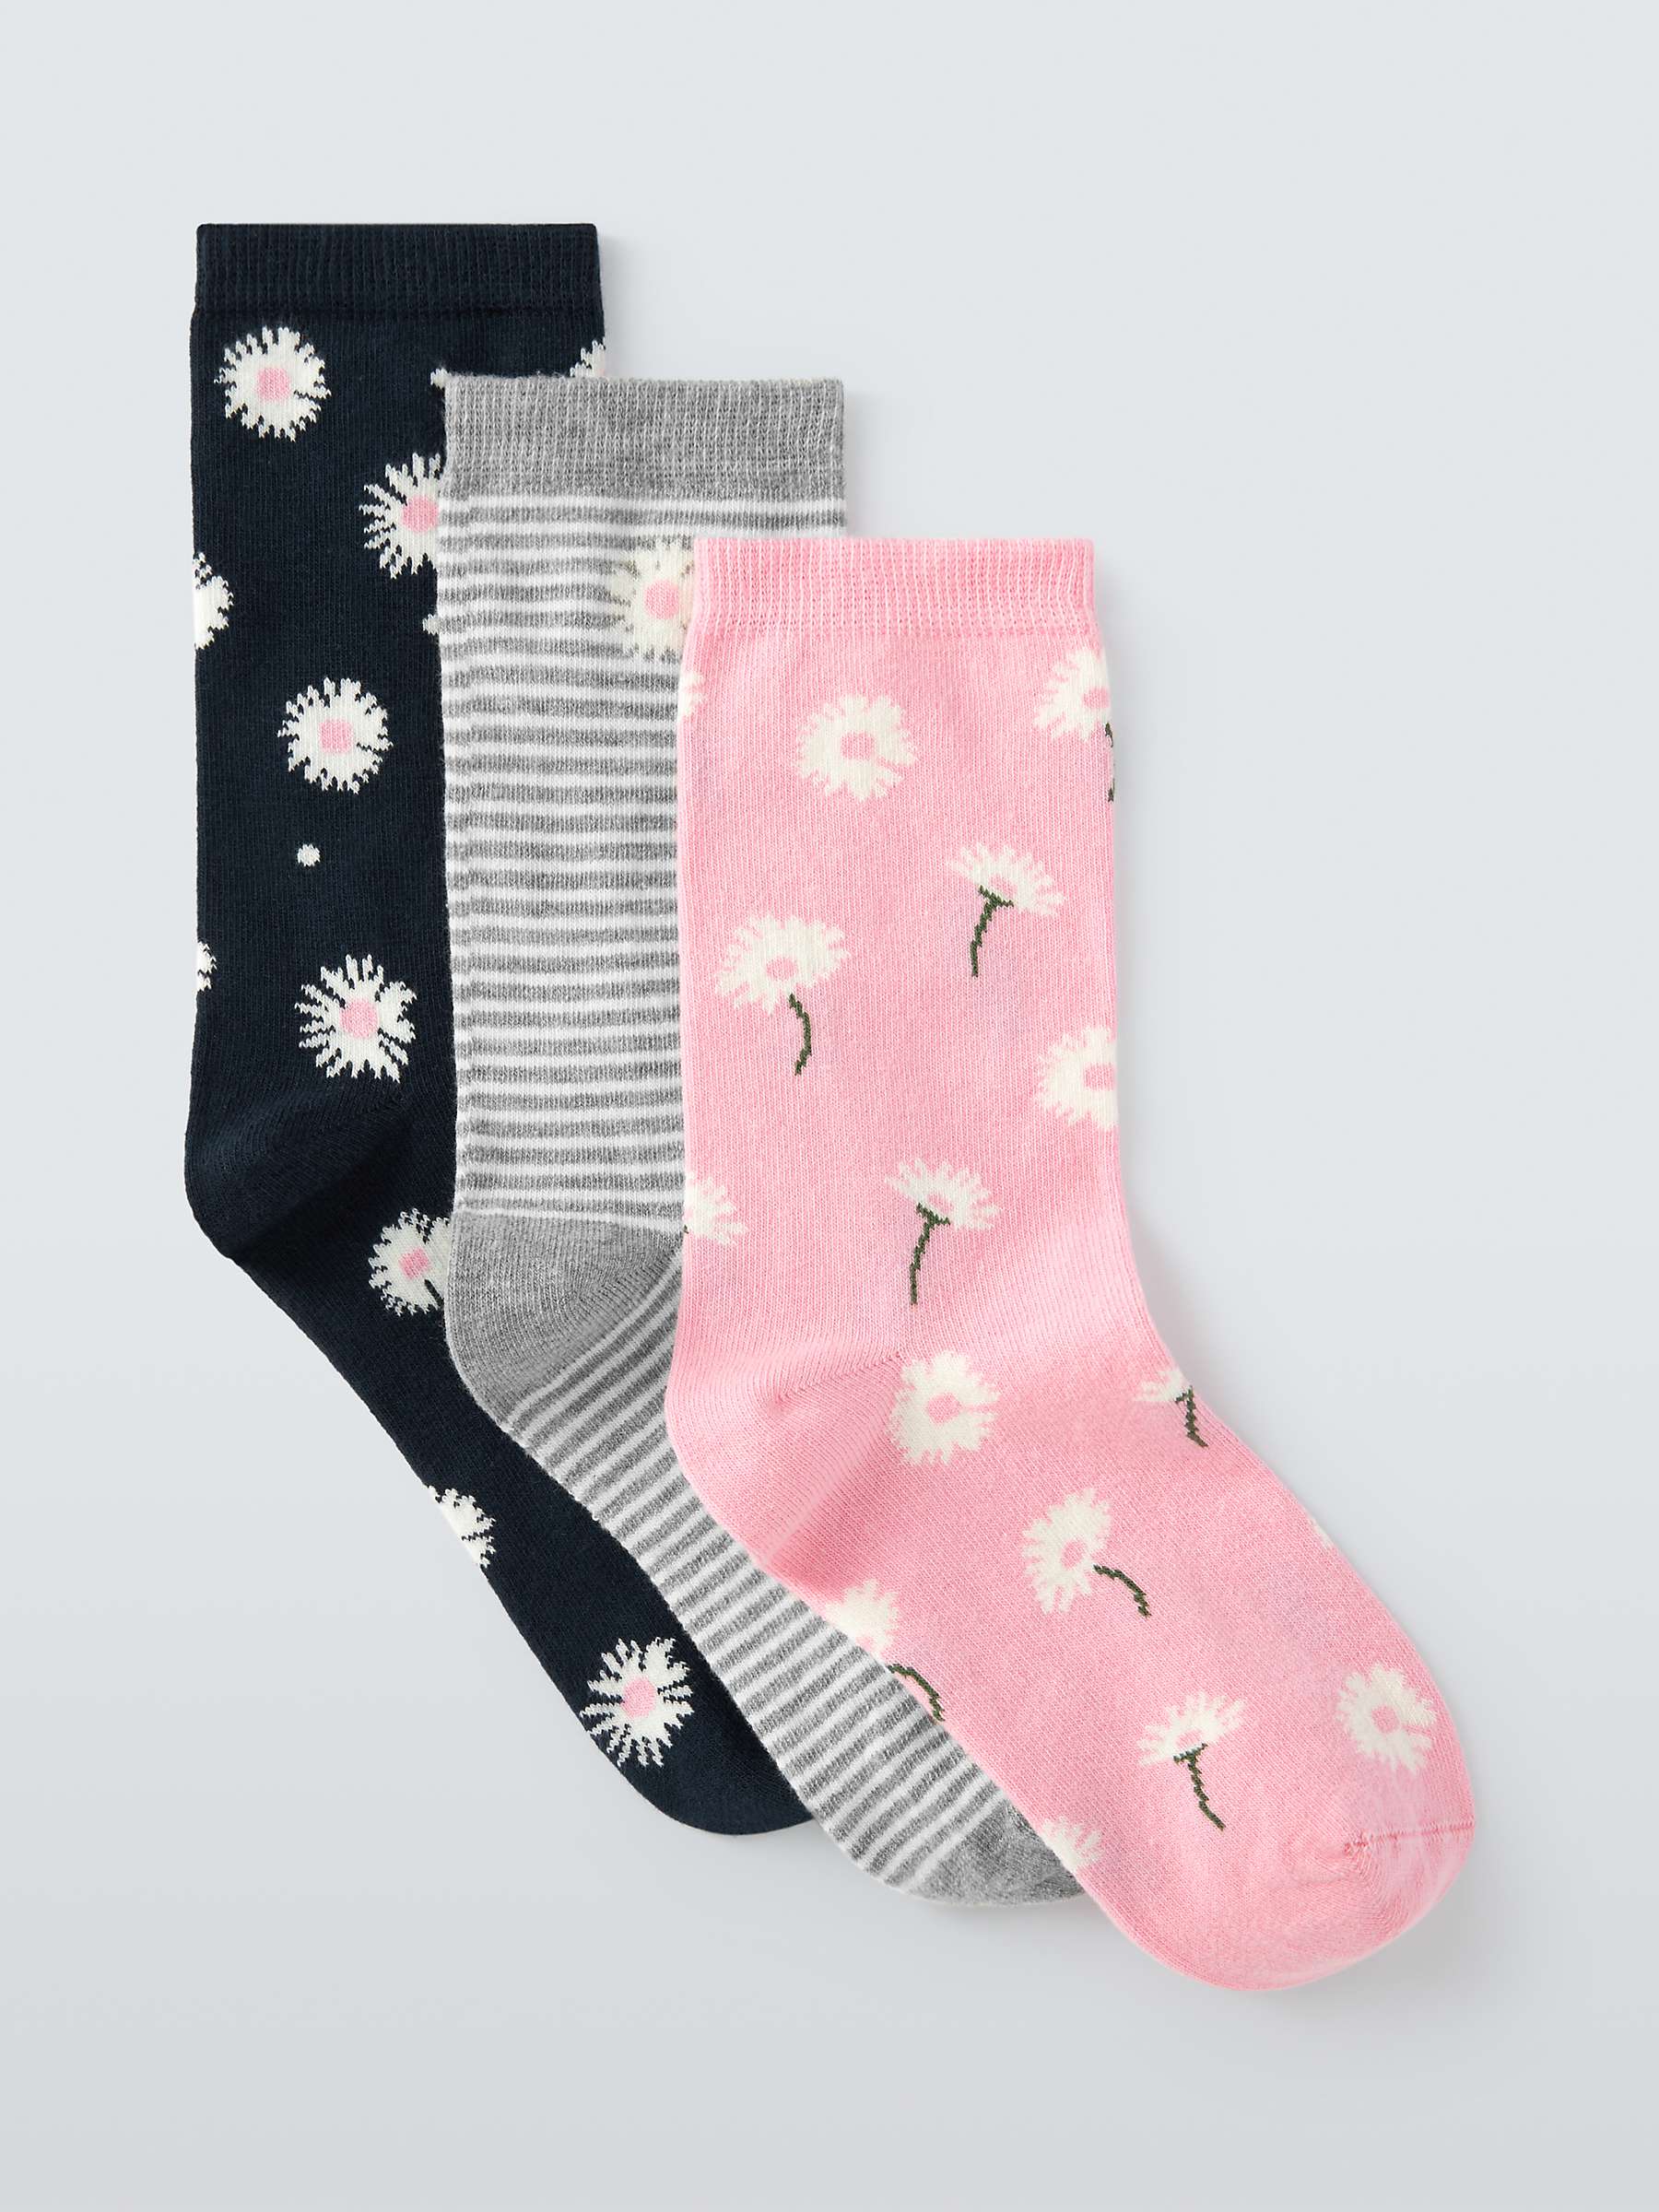 Buy John Lewis Daisy Print Cotton Mix Ankle Socks, Pack of 3, Grey/Multi Online at johnlewis.com